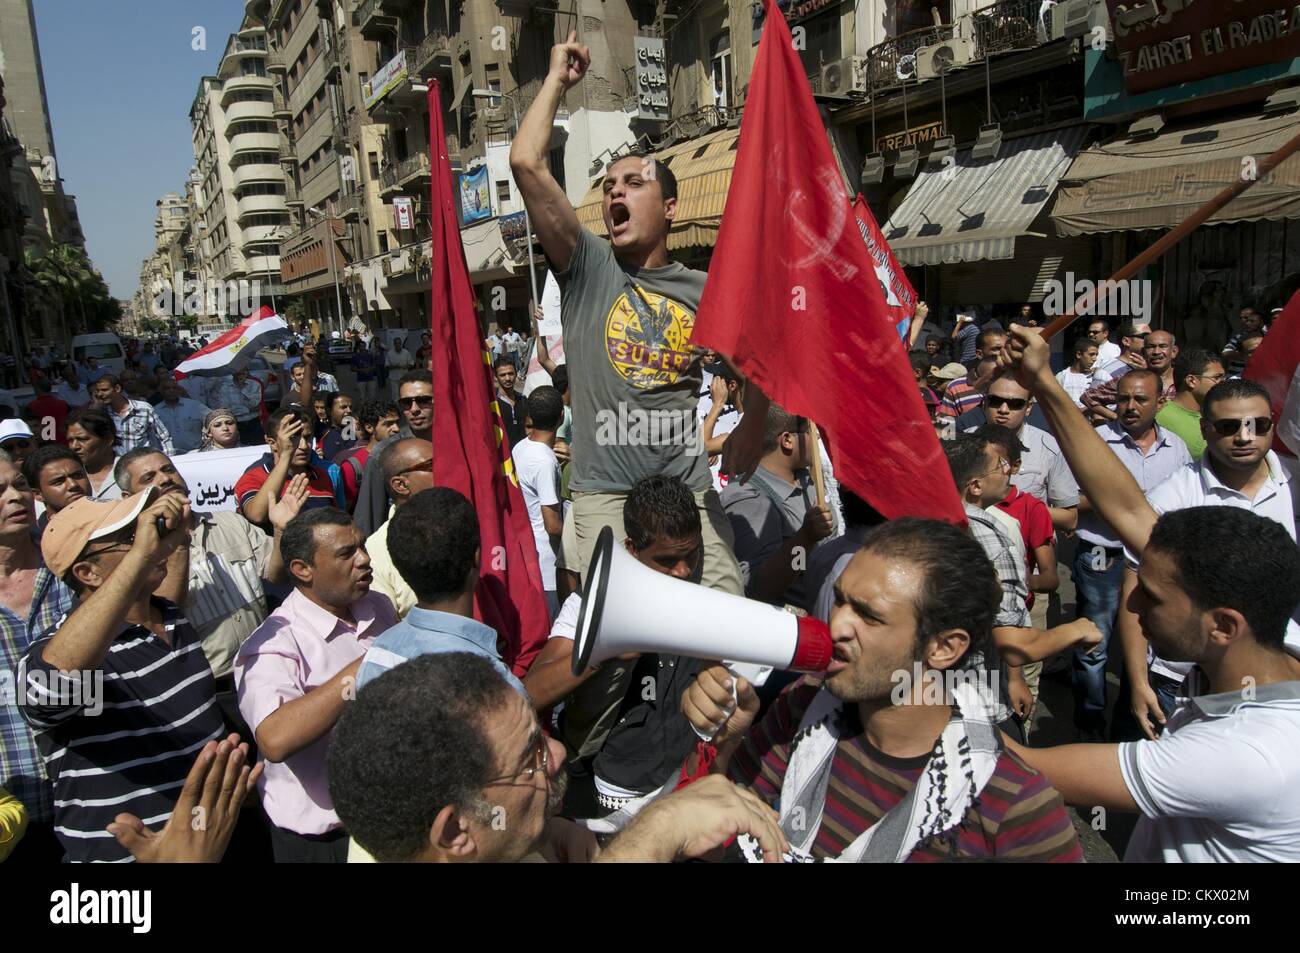 Aug. 24, 2012 - Cairo, Egypt - Supporters and opponents of Egyptian President's Muslim Brotherhood Government clash in downtown Cairo. Anti-Muslim Brotherhood protesters called for a second revolution and plan protests in several areas of the city. (Credit Image: © Cliff Cheney/ZUMAPRESS.com/Alamy Live News) Stock Photo